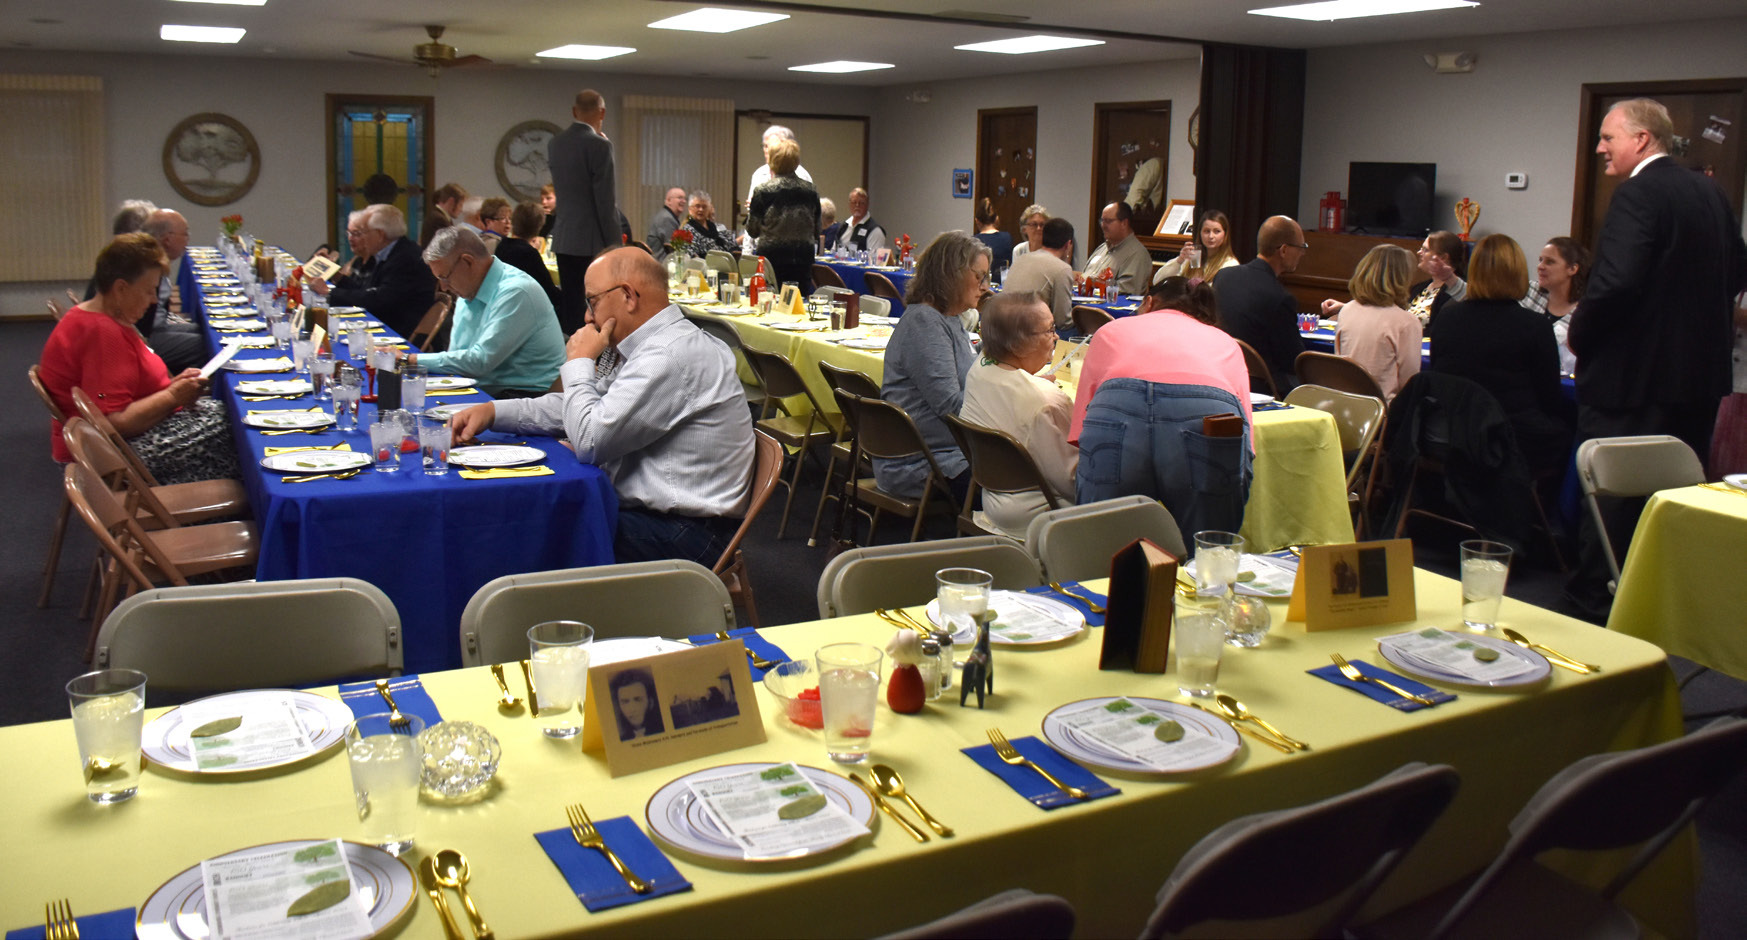 ABOVE: People enjoyed fellowship to reconnect at Stromsburg Evangelical Covenant Church’s 150th. BELOW: Many historical items were on display as decorations and for perusal. PCN photos by Beth Sparrow.